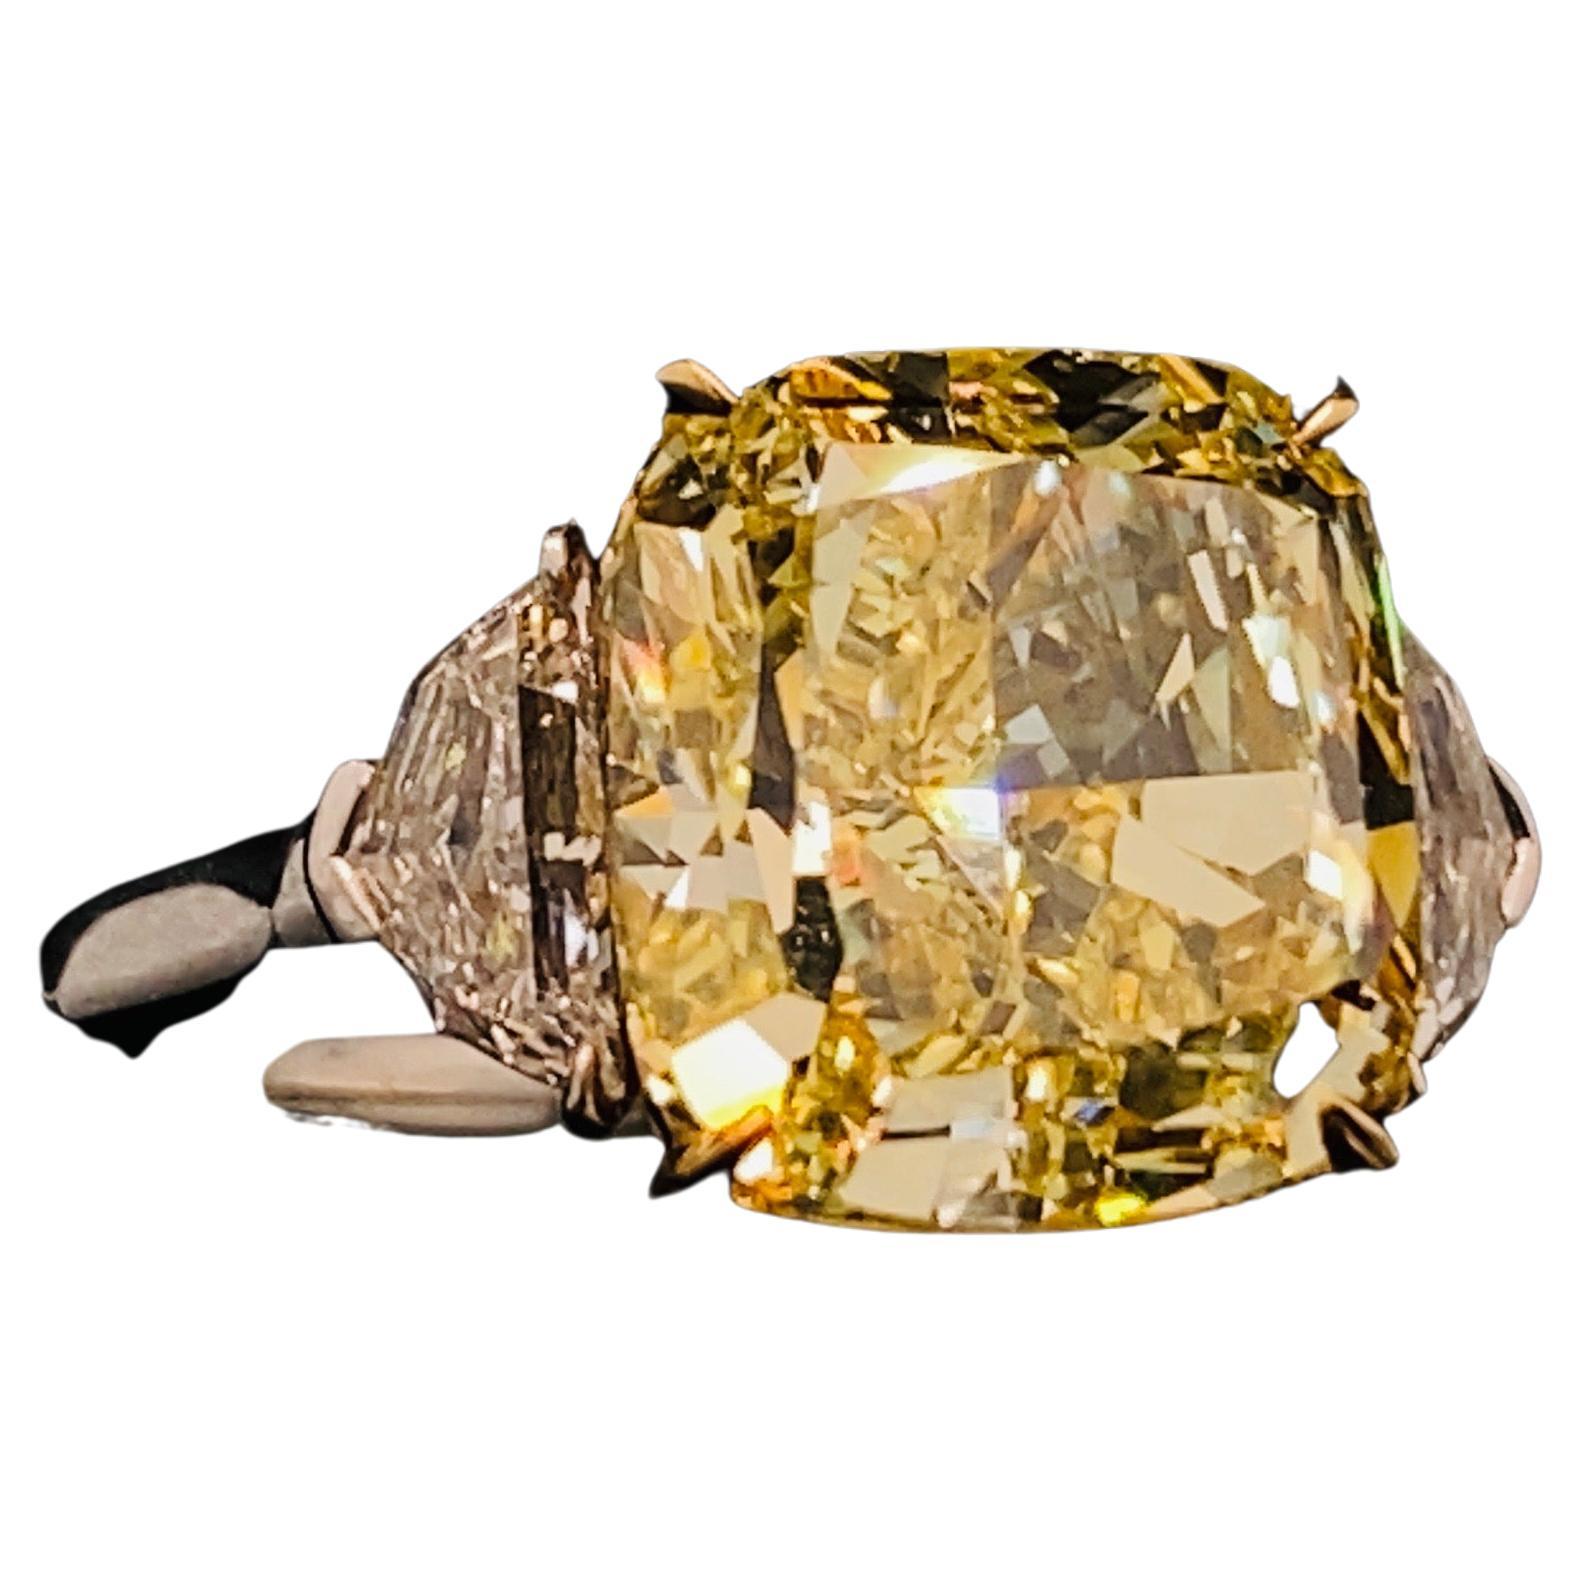 From The Vault at Emilio Jewelry Located on New York's iconic Fifth Avenue,
Showcasing a very special and rare Gia certified natural fancy intense yellow diamond set in the center. 
 Hand made in the Emilio Jewelry Atelier, whom specializes in rare